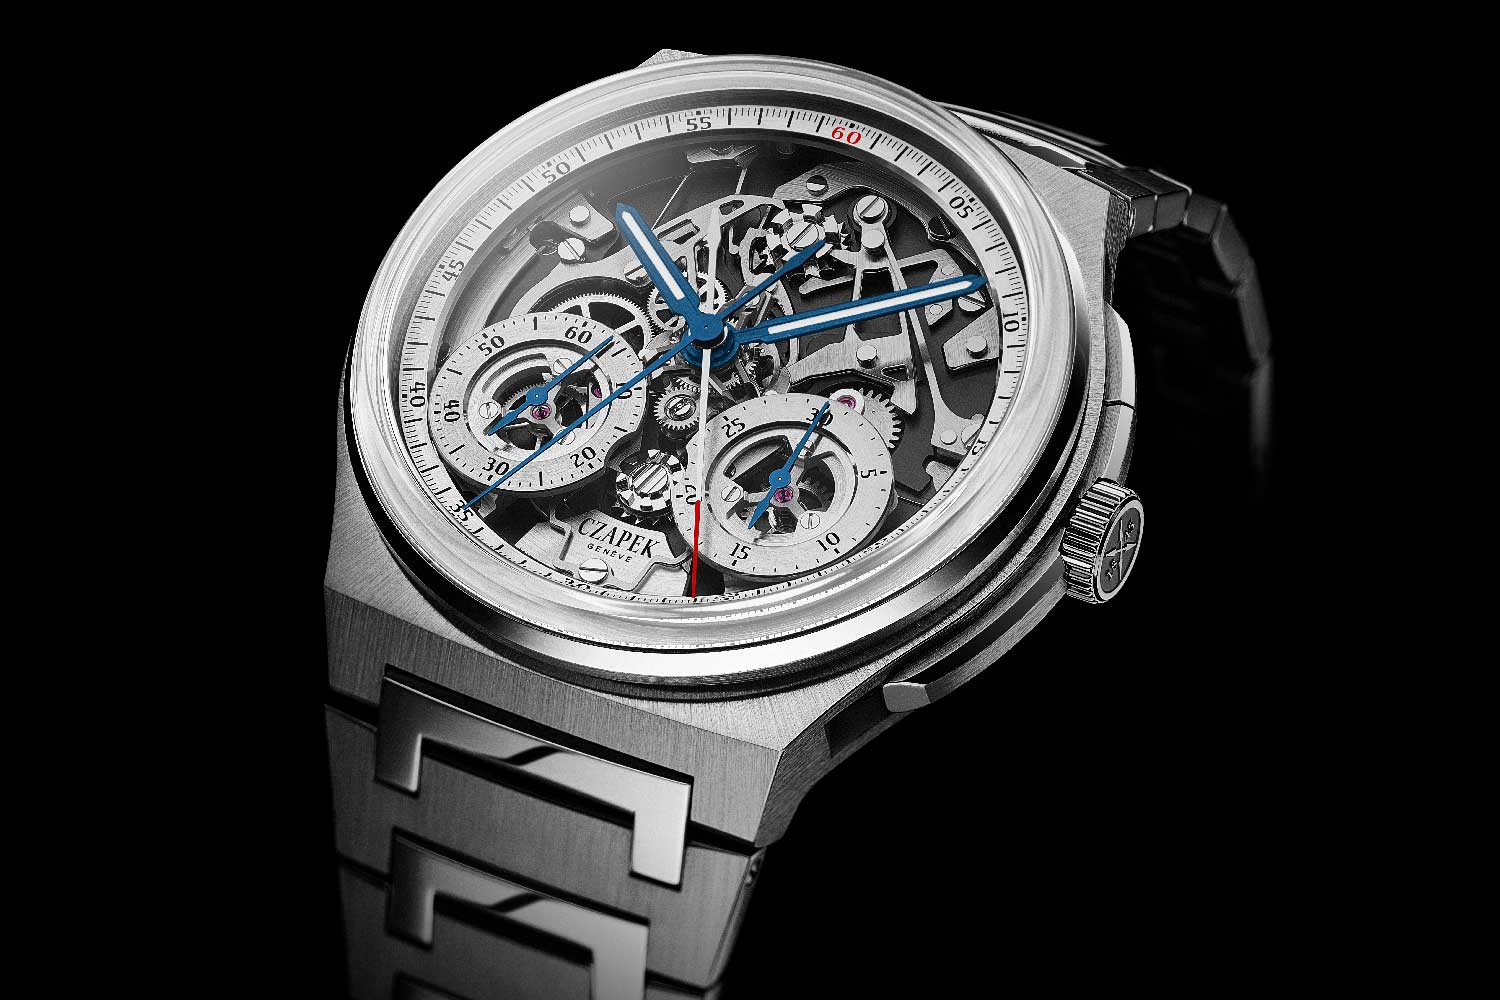 The successful Antarctique collection has now expanded with this new skeletonized split-seconds chronograph.